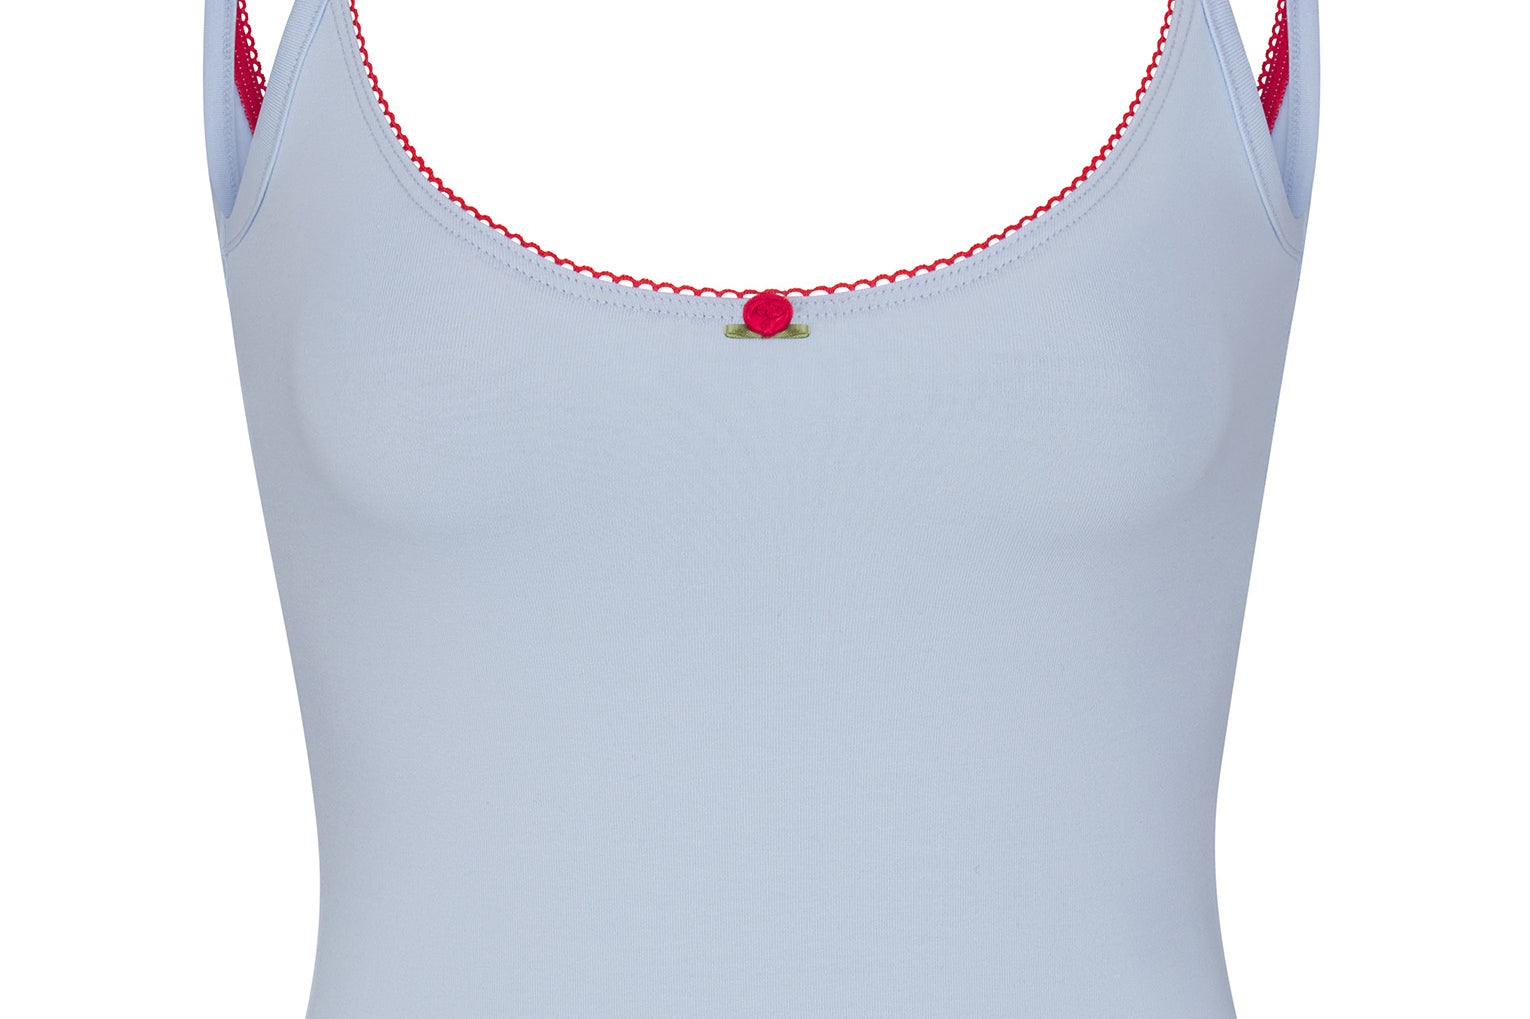 SCOOP BACK CAMI IN BABY BLUE/CHERRY